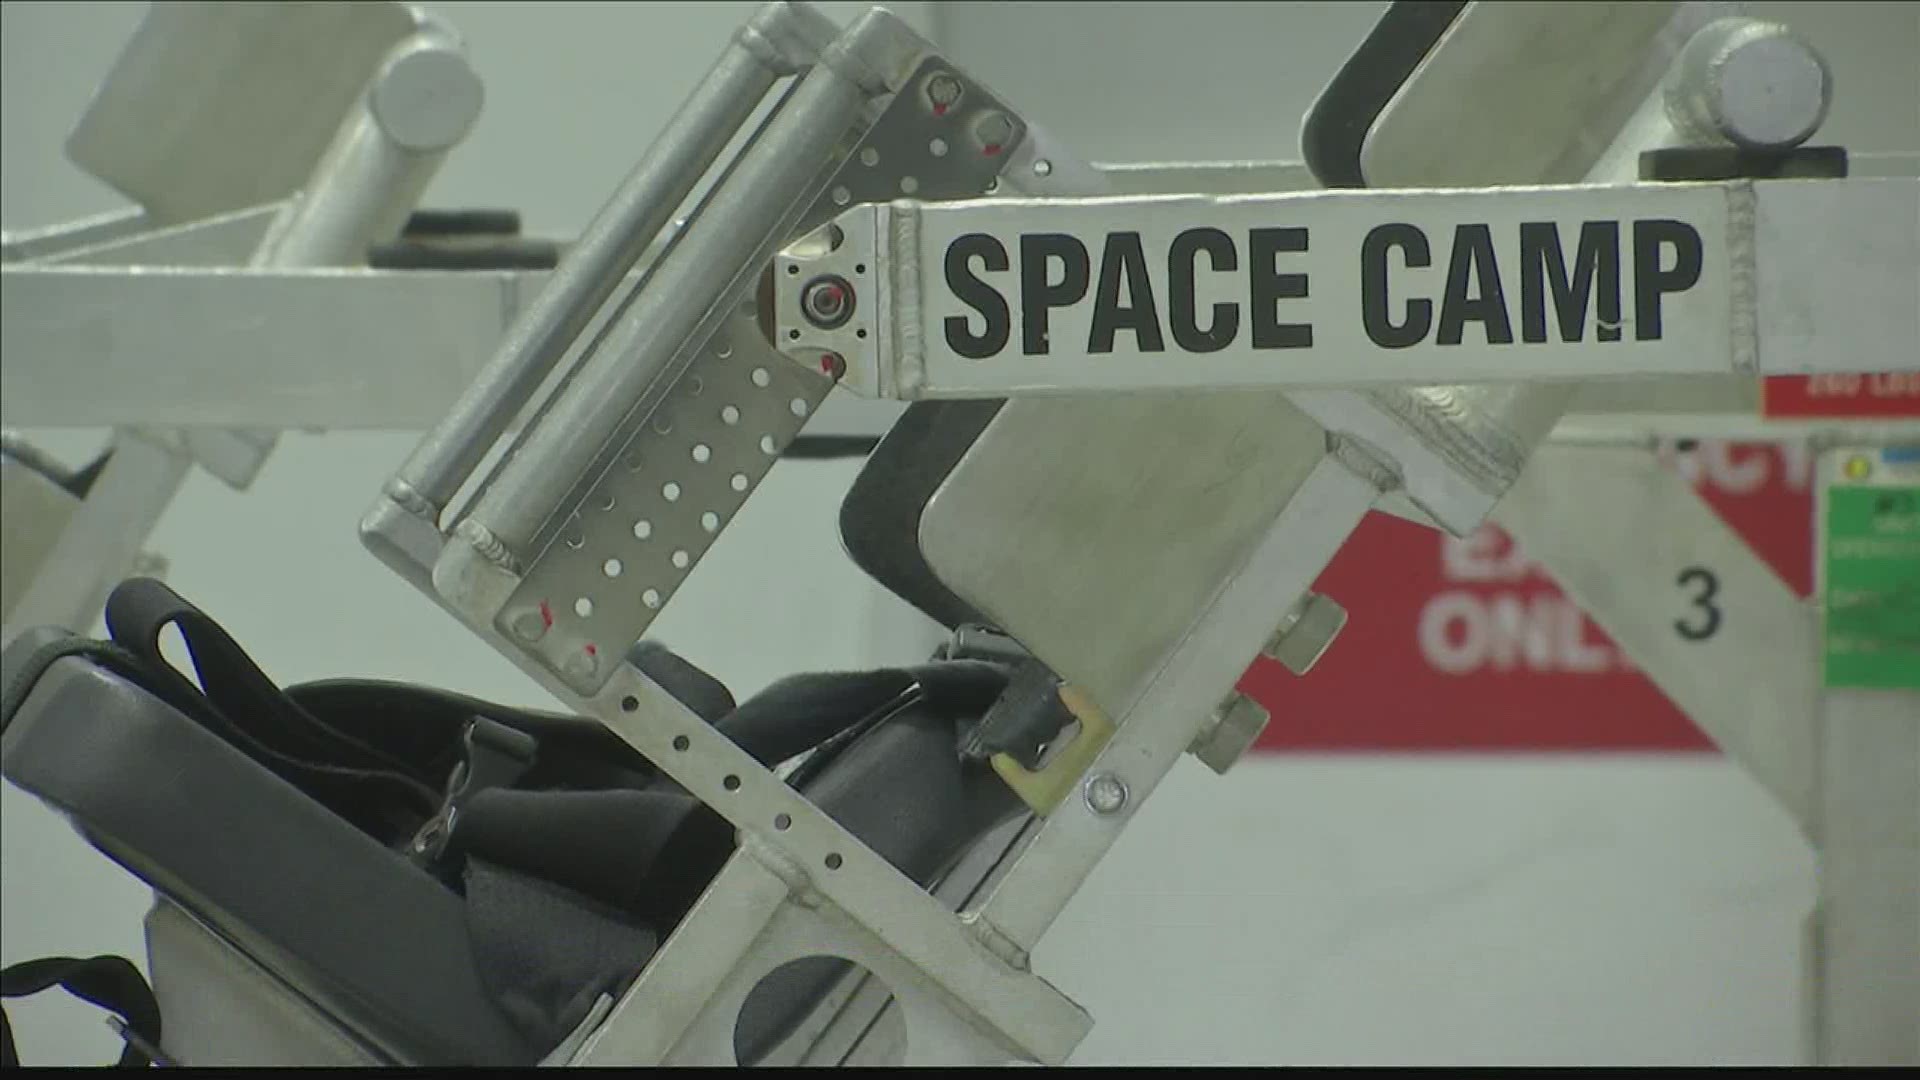 The U.S. Space and Rocket Center is going ahead with Space Camp this weekend.